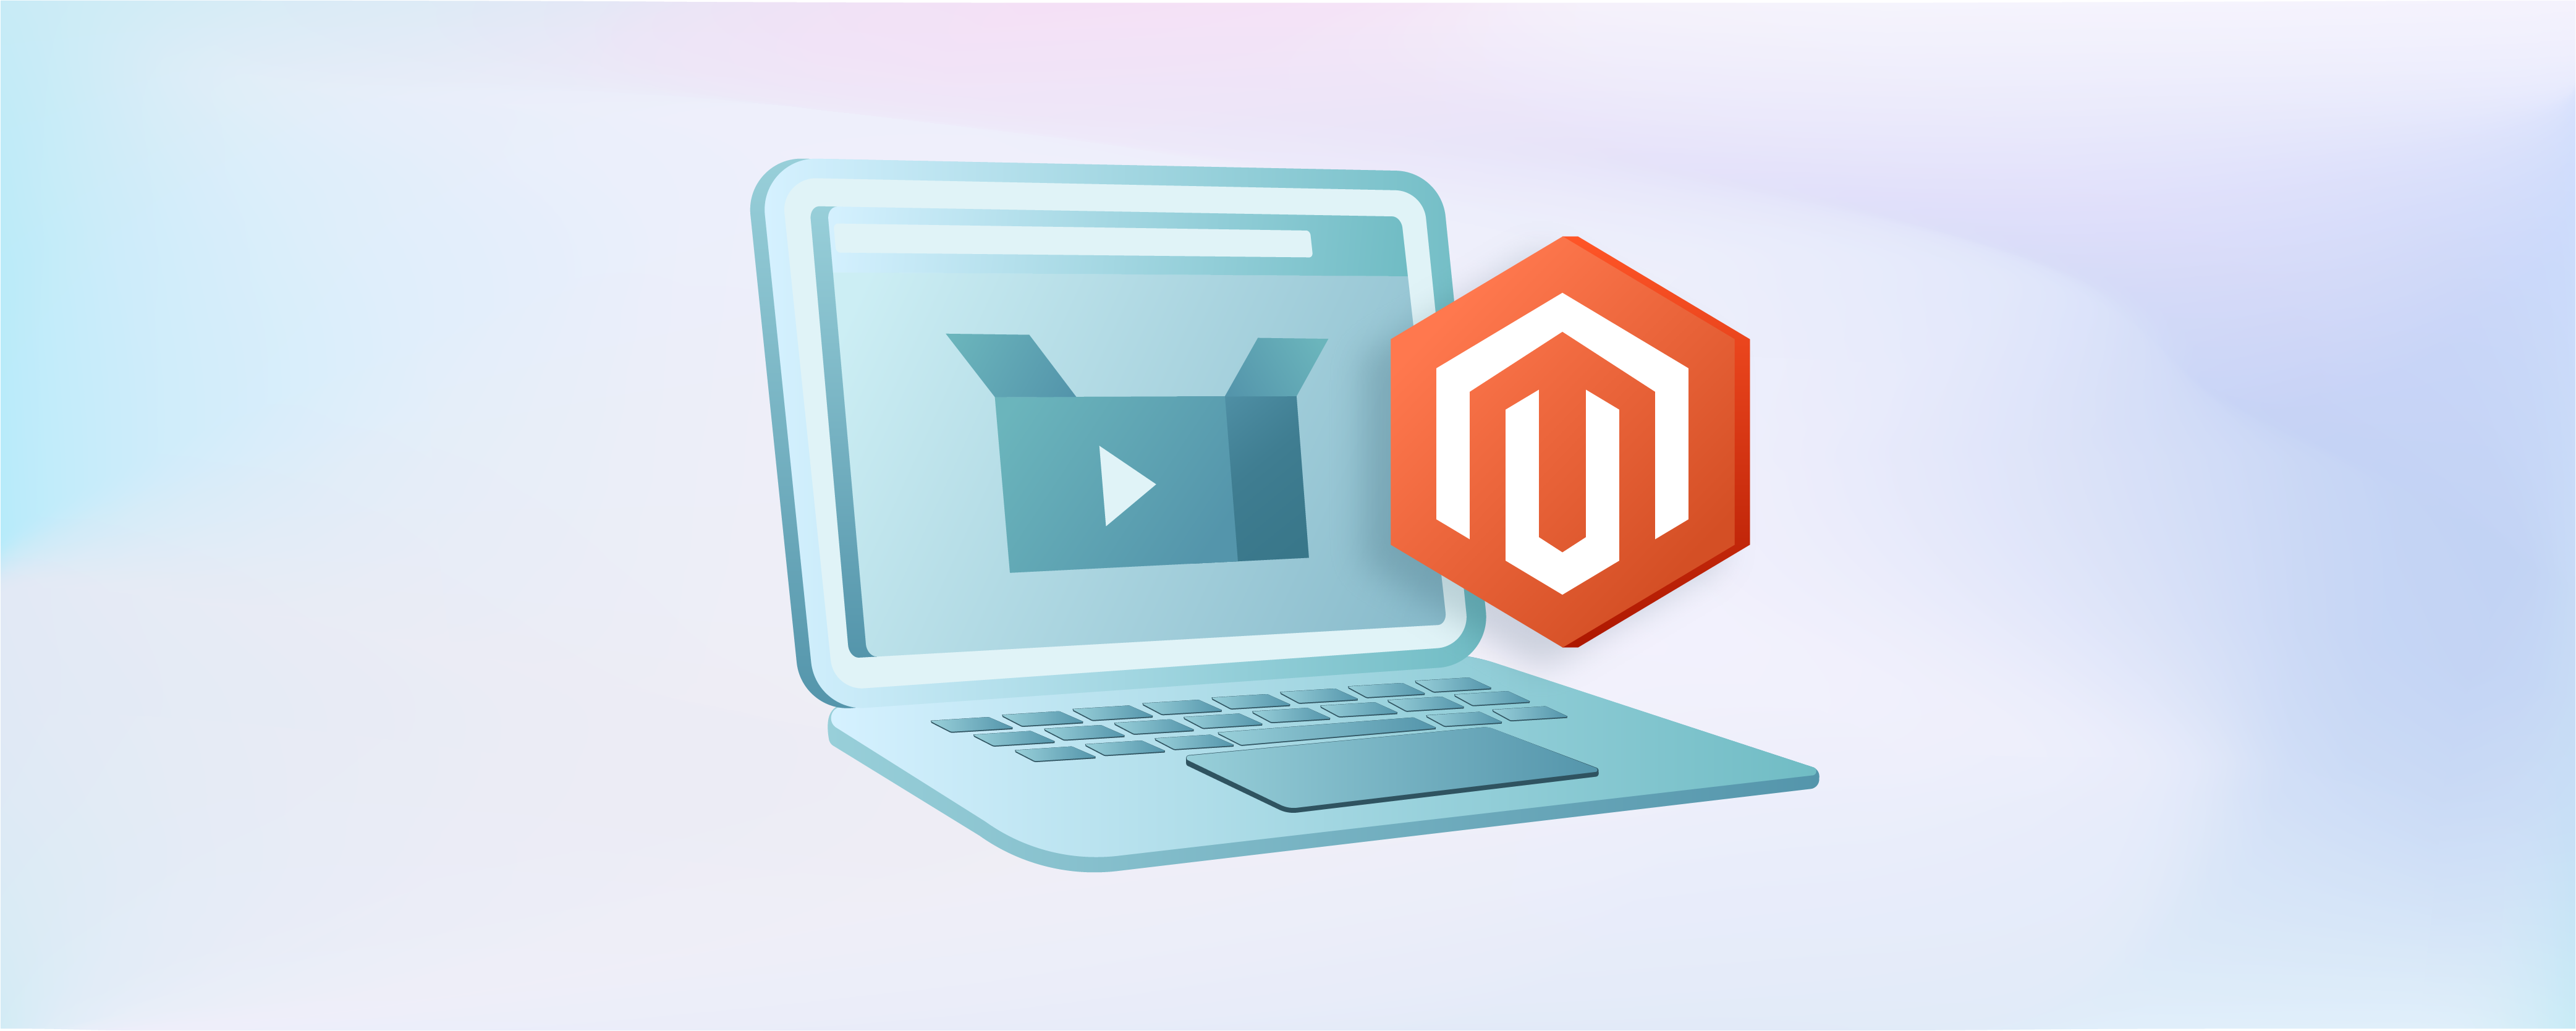 How to Add Magento 2 Product Video?